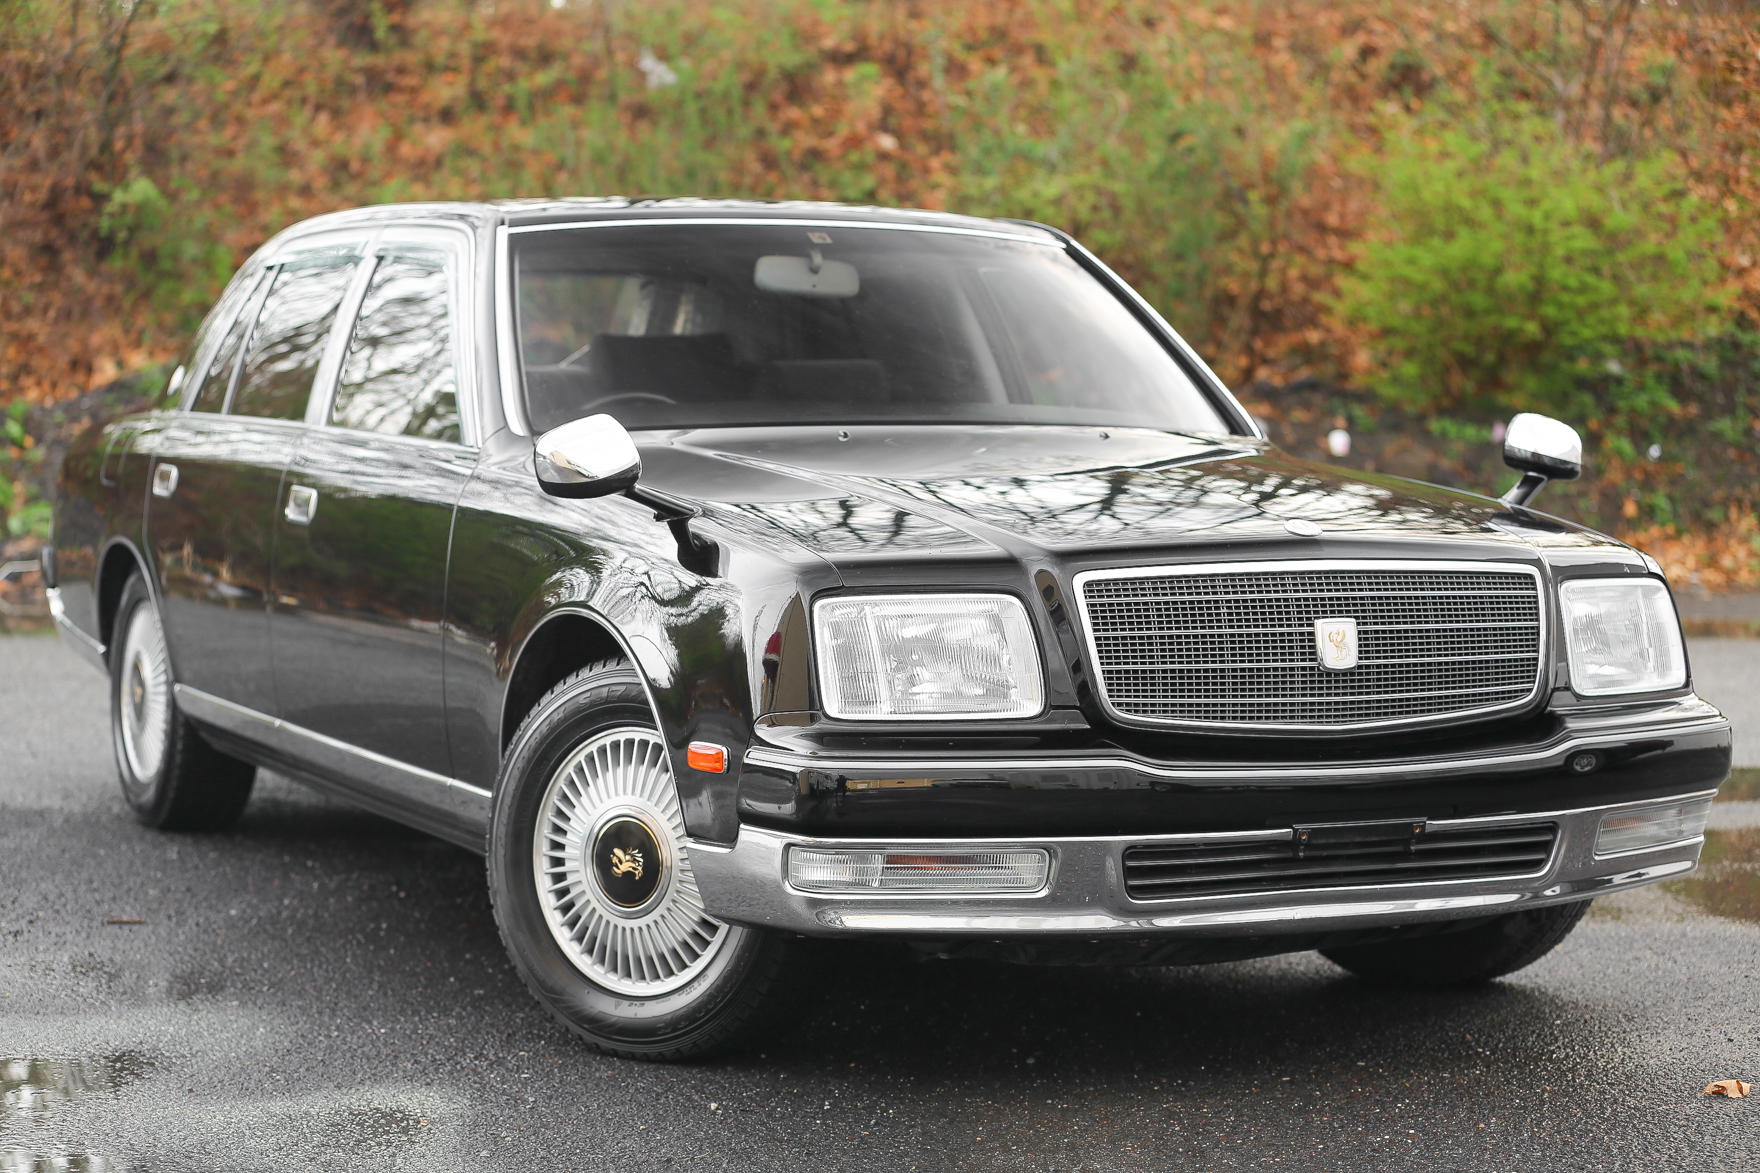 1997 Toyota Century V12 - Available for $34,995